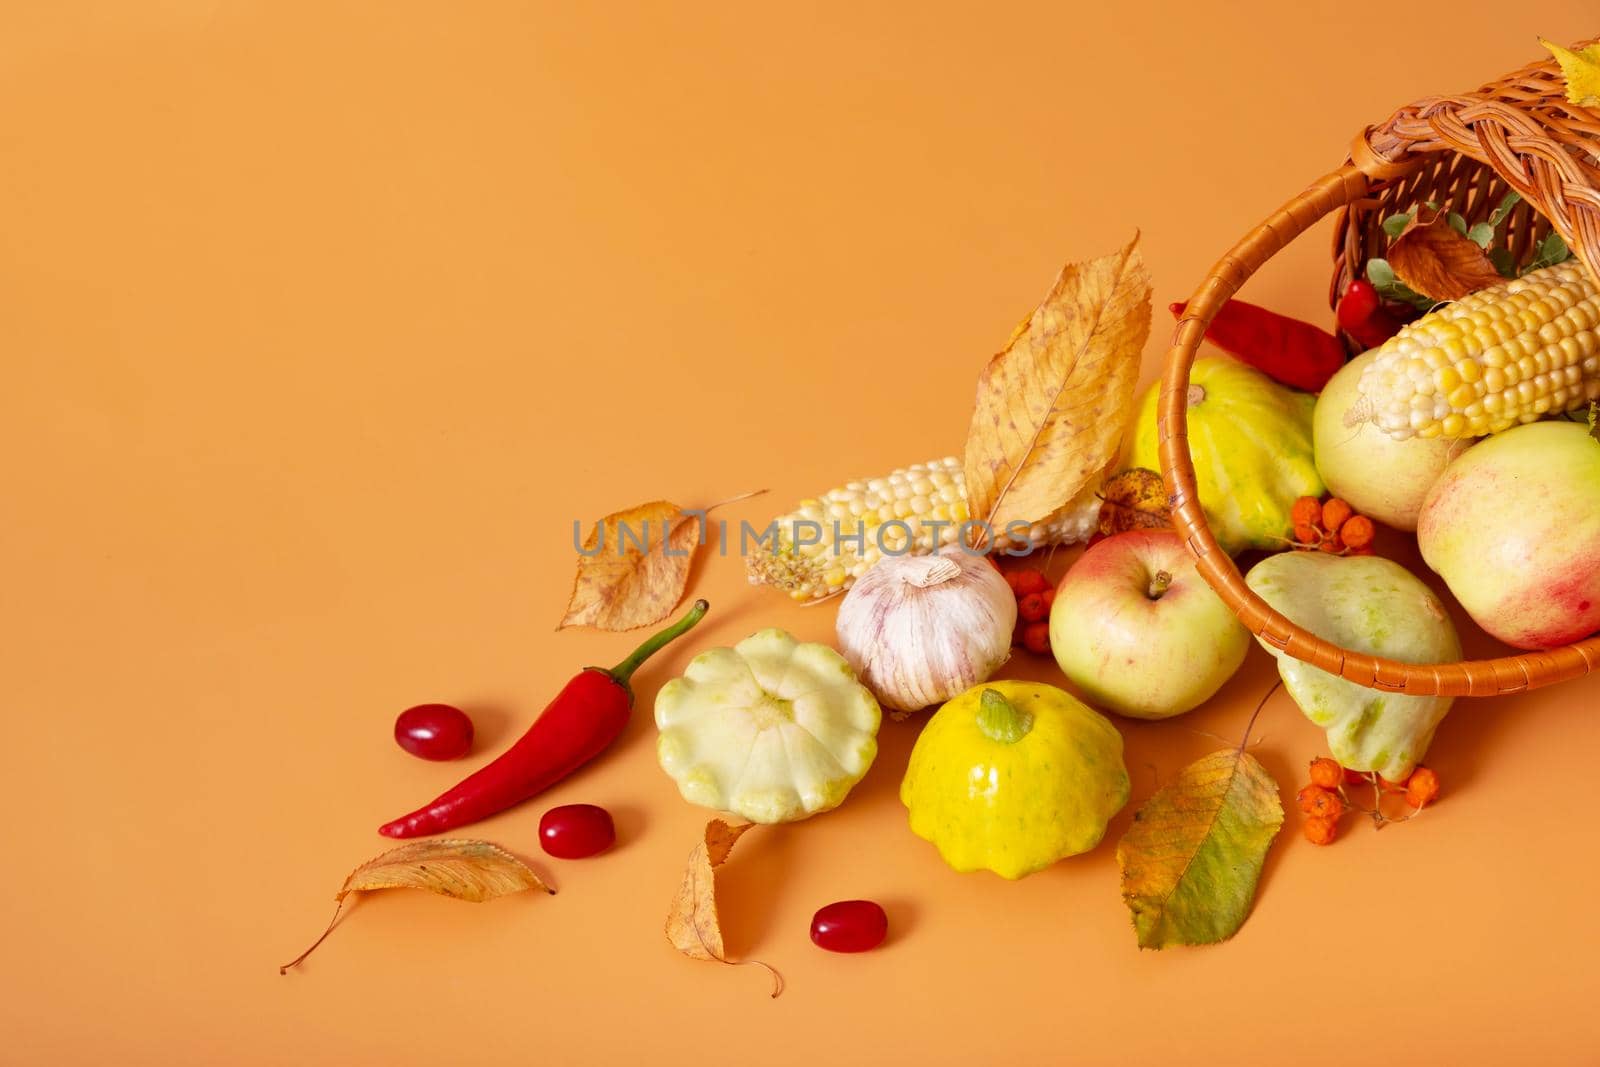 Autumn harvest basket with corn, apples, zucchini and peppers on a orange background. Harvest concept.